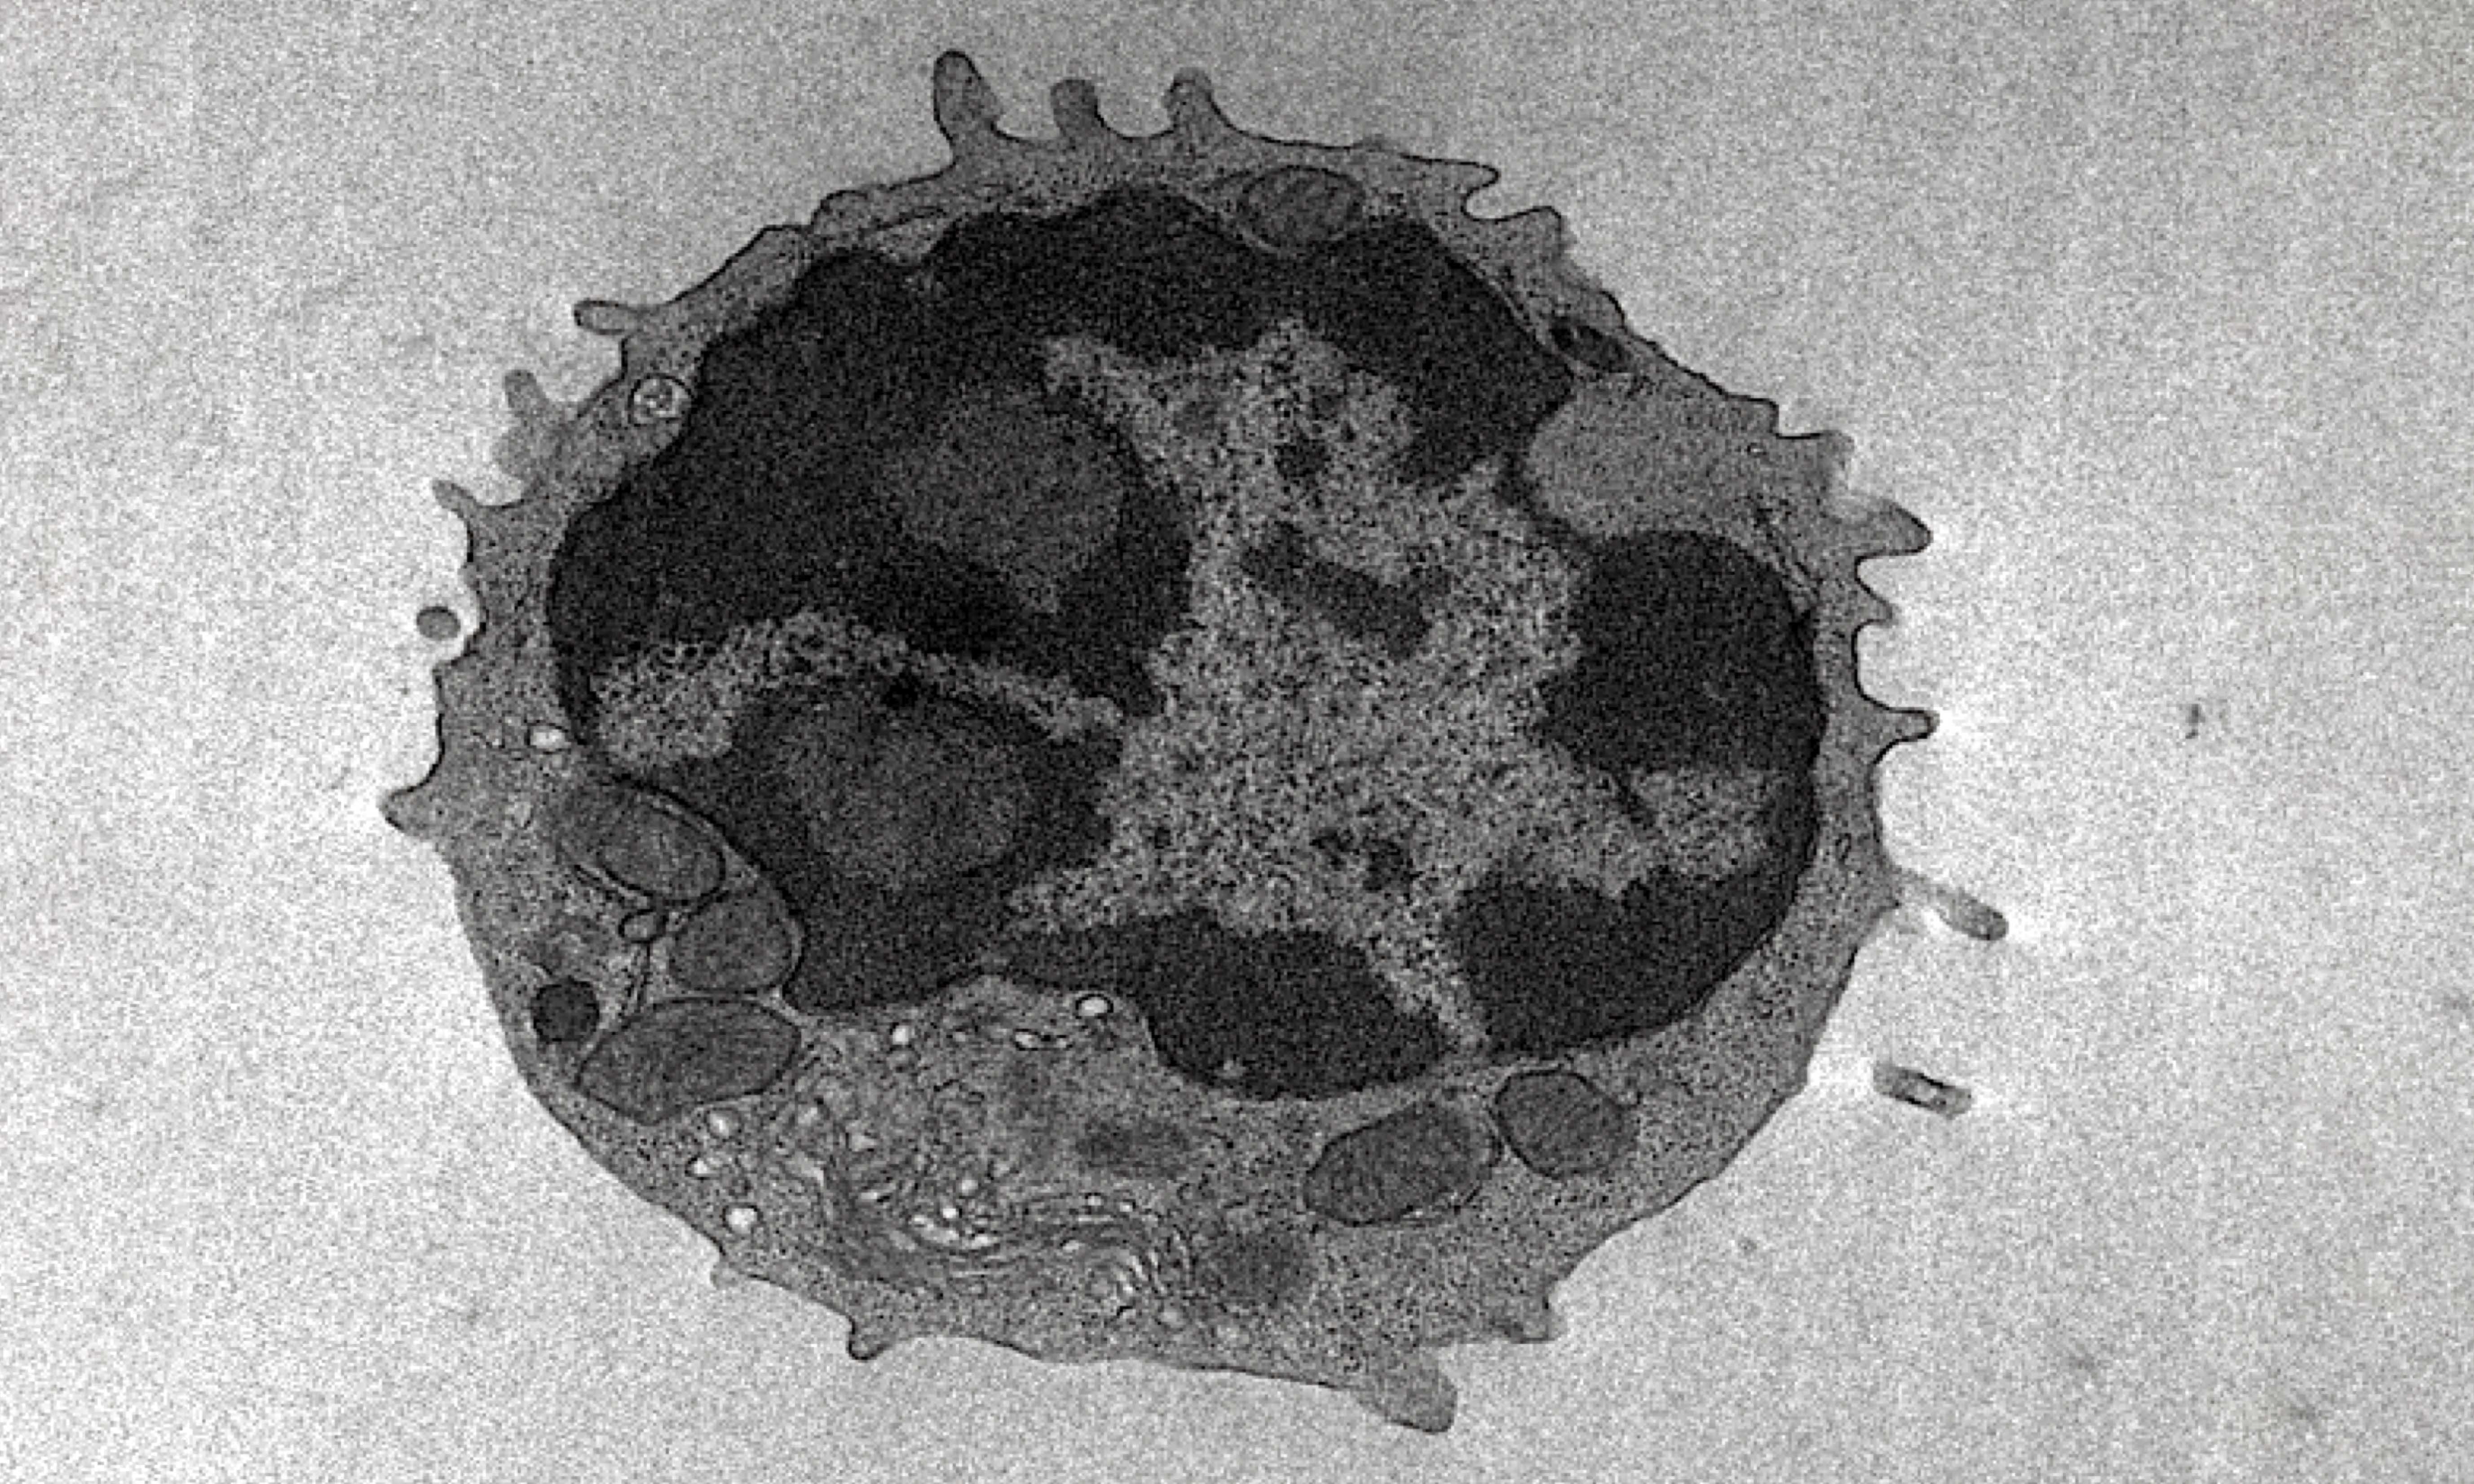 A magnified image of a T cell, showing the bean-like mitochondria that were the focus of the researchers' metabolic analyses.